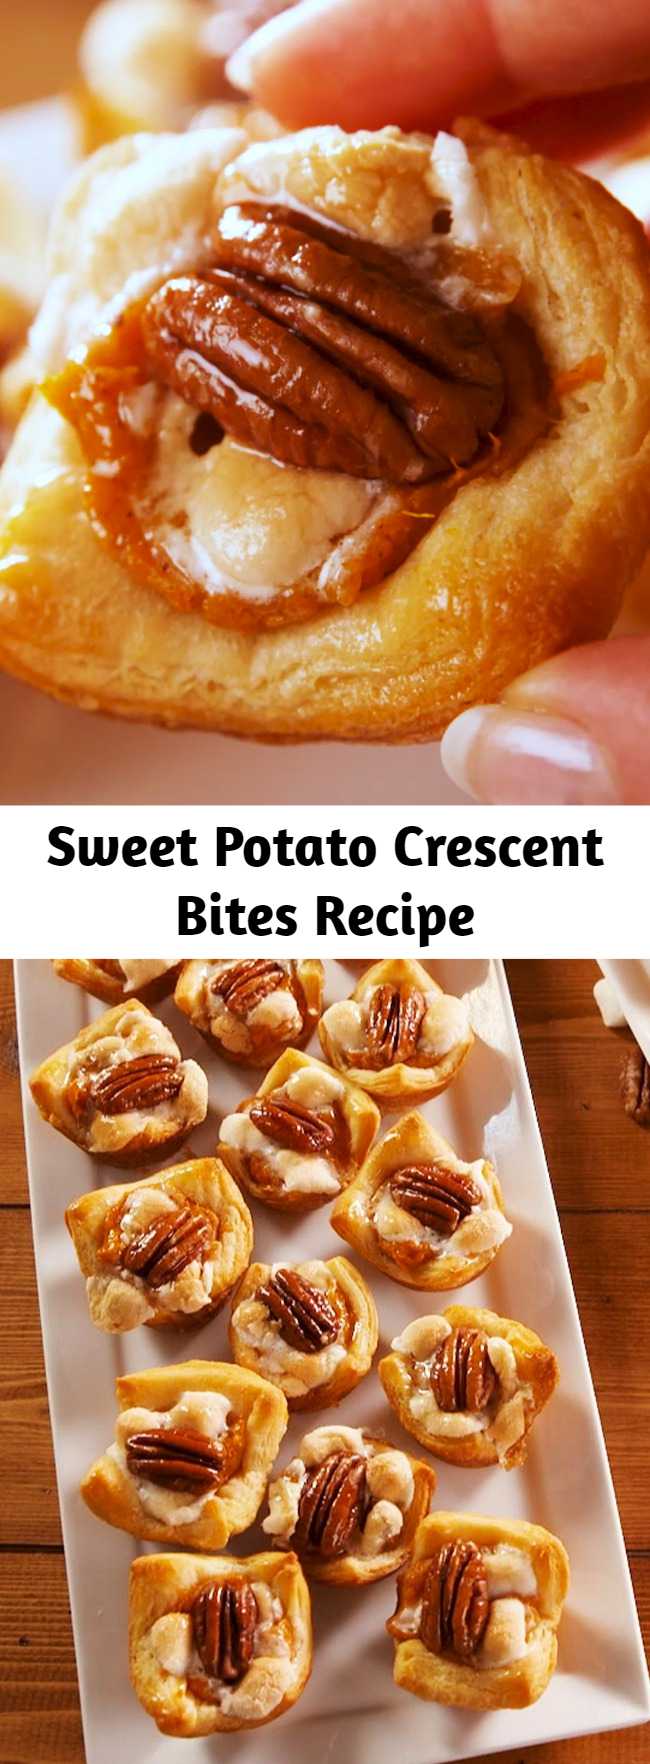 Sweet Potato Crescent Bites Recipe - A guarantee: You will NOT be able to stop eating these little guys. They're the perfect amount of sweet and savory, so you can serve them before or after the big meal! #easy #recipe #thanksgiving #holiday #app #appetizer #fingerfoods #Pecan #crescentrolls #sweetpotato #potato #marshmallows #minimarshmallows #quick